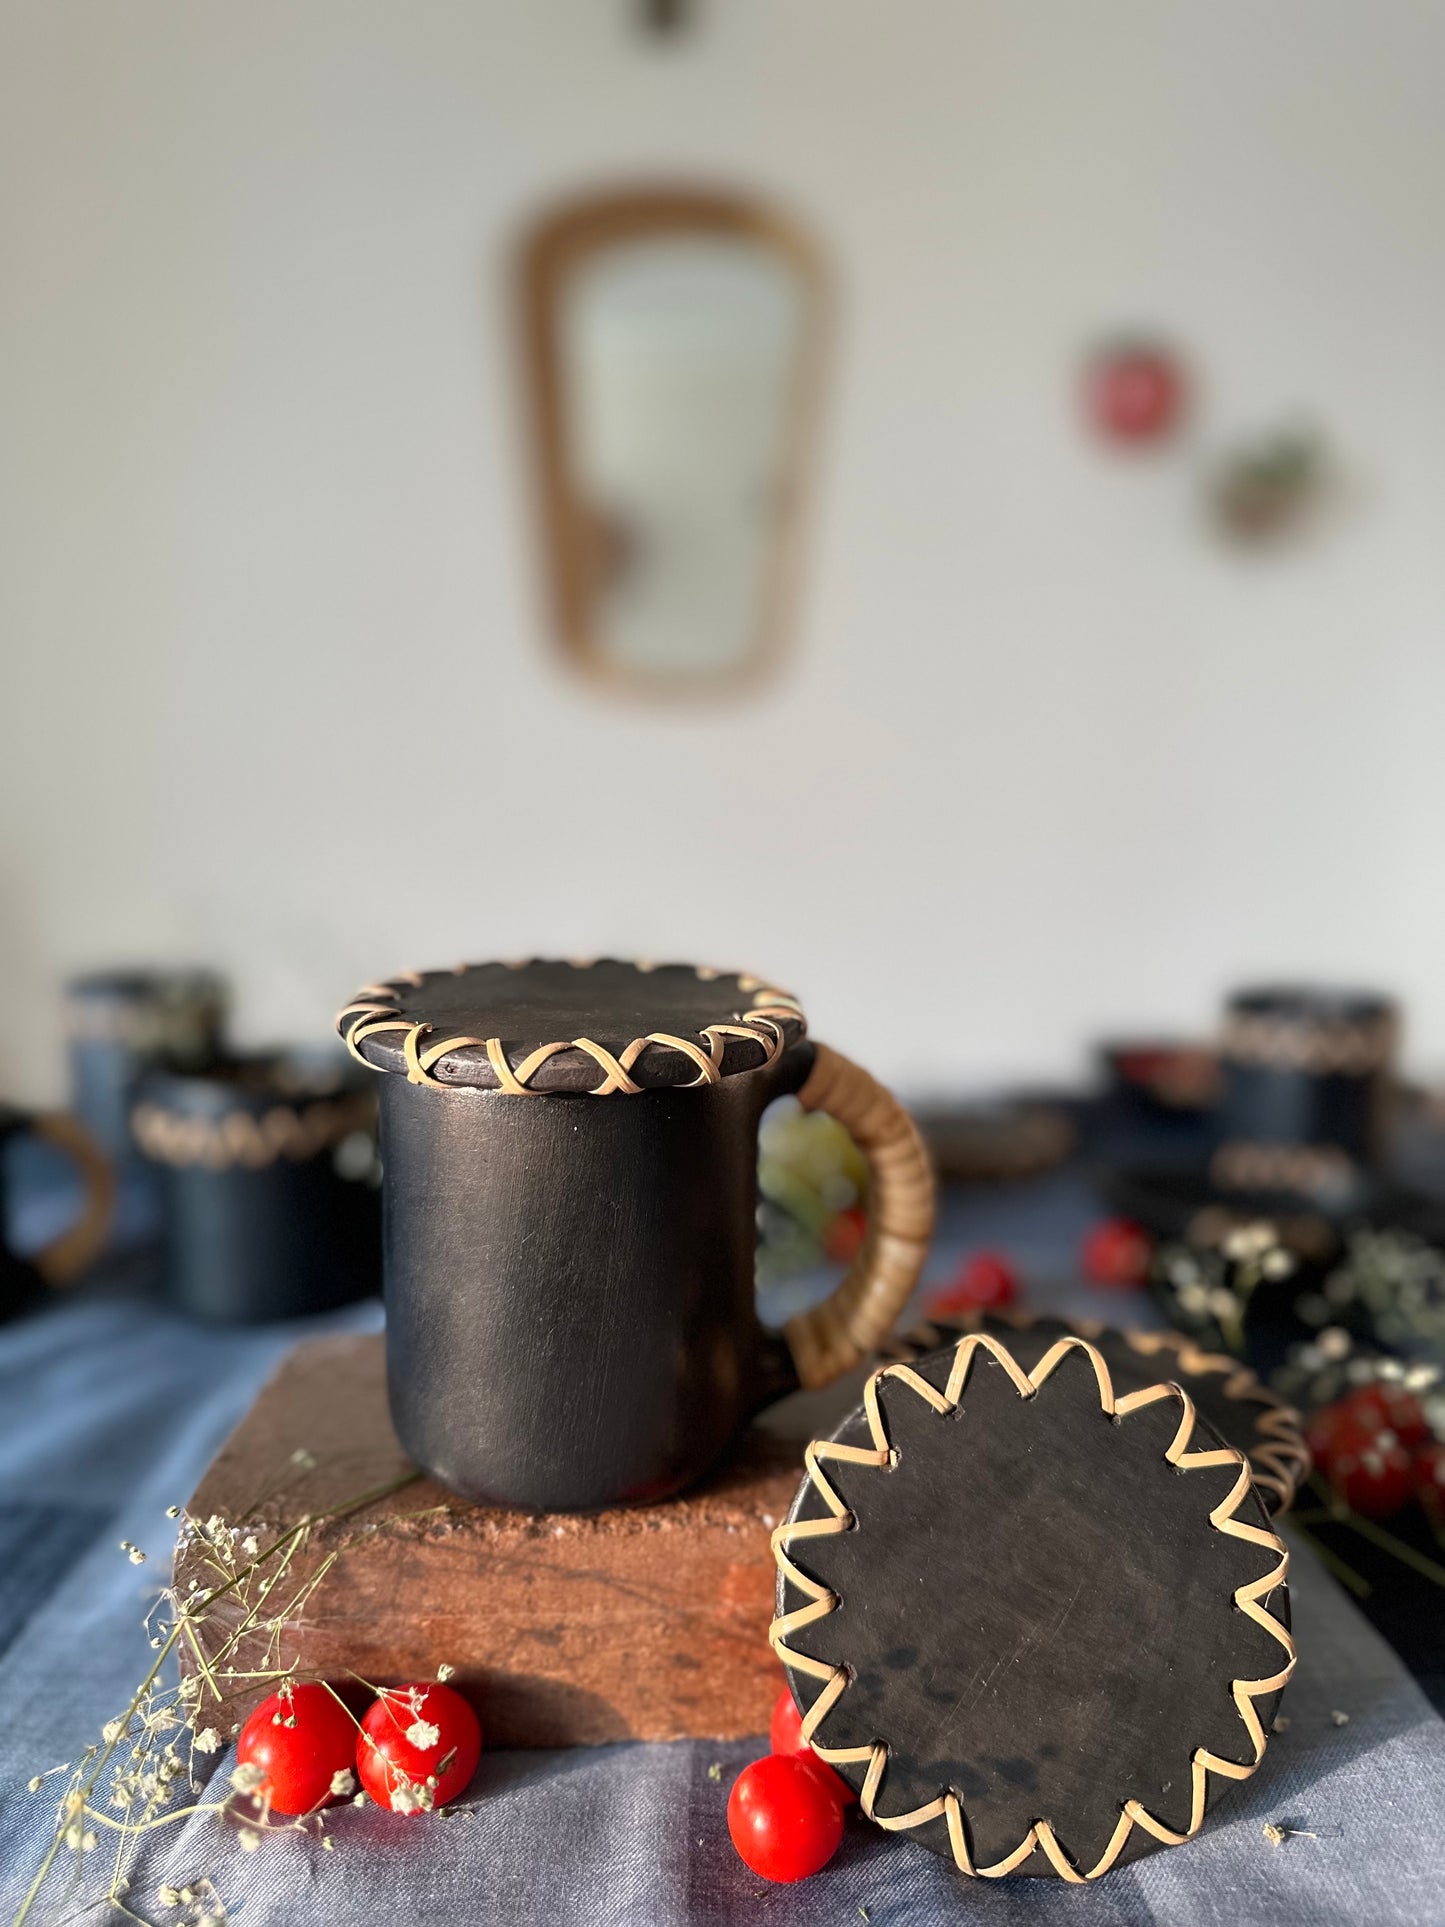 Black Pottery Cups and Coasters I Longpi set of 2 cups( Medium ) and 2 coasters.